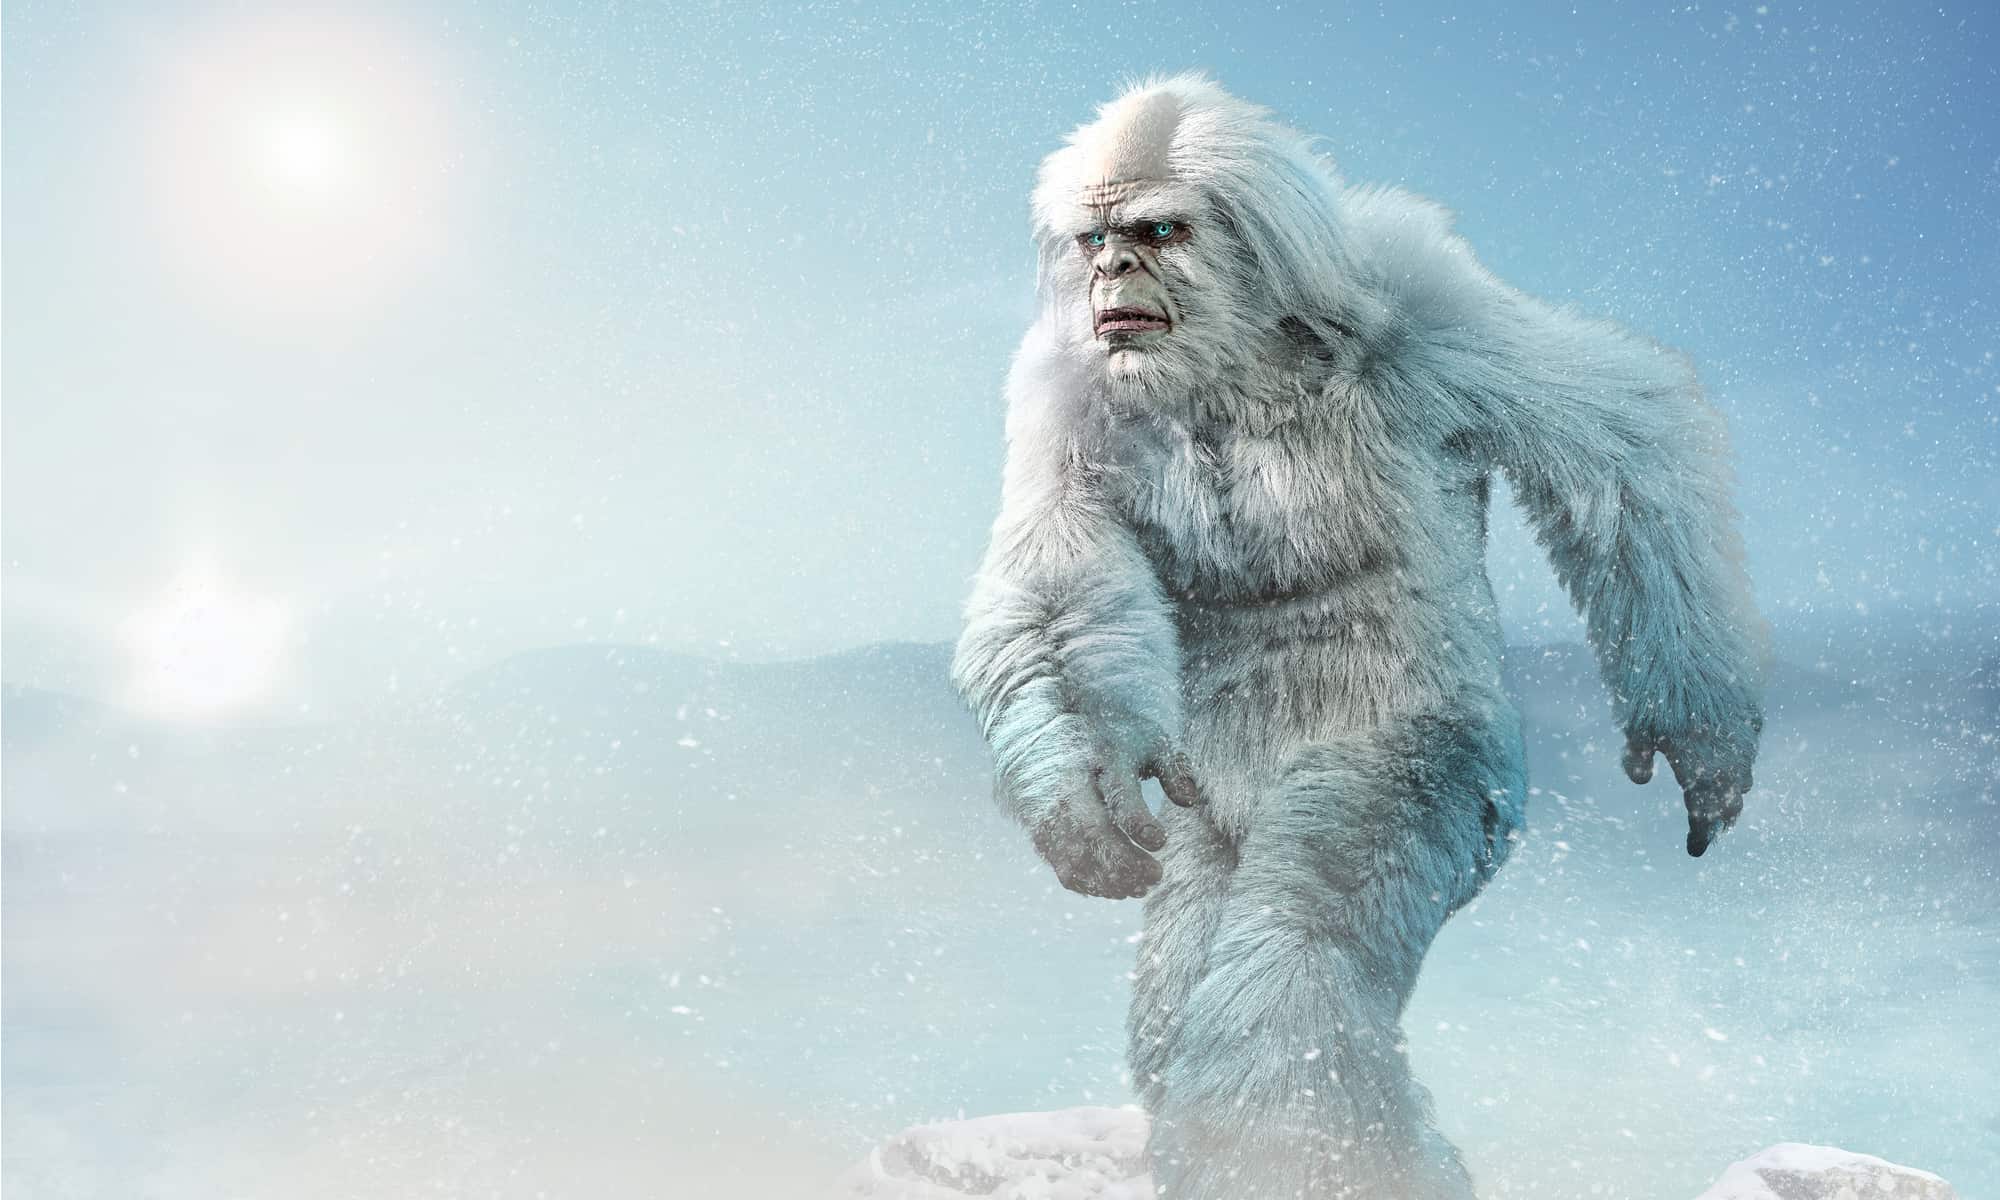 10 things you may not know about the Yeti